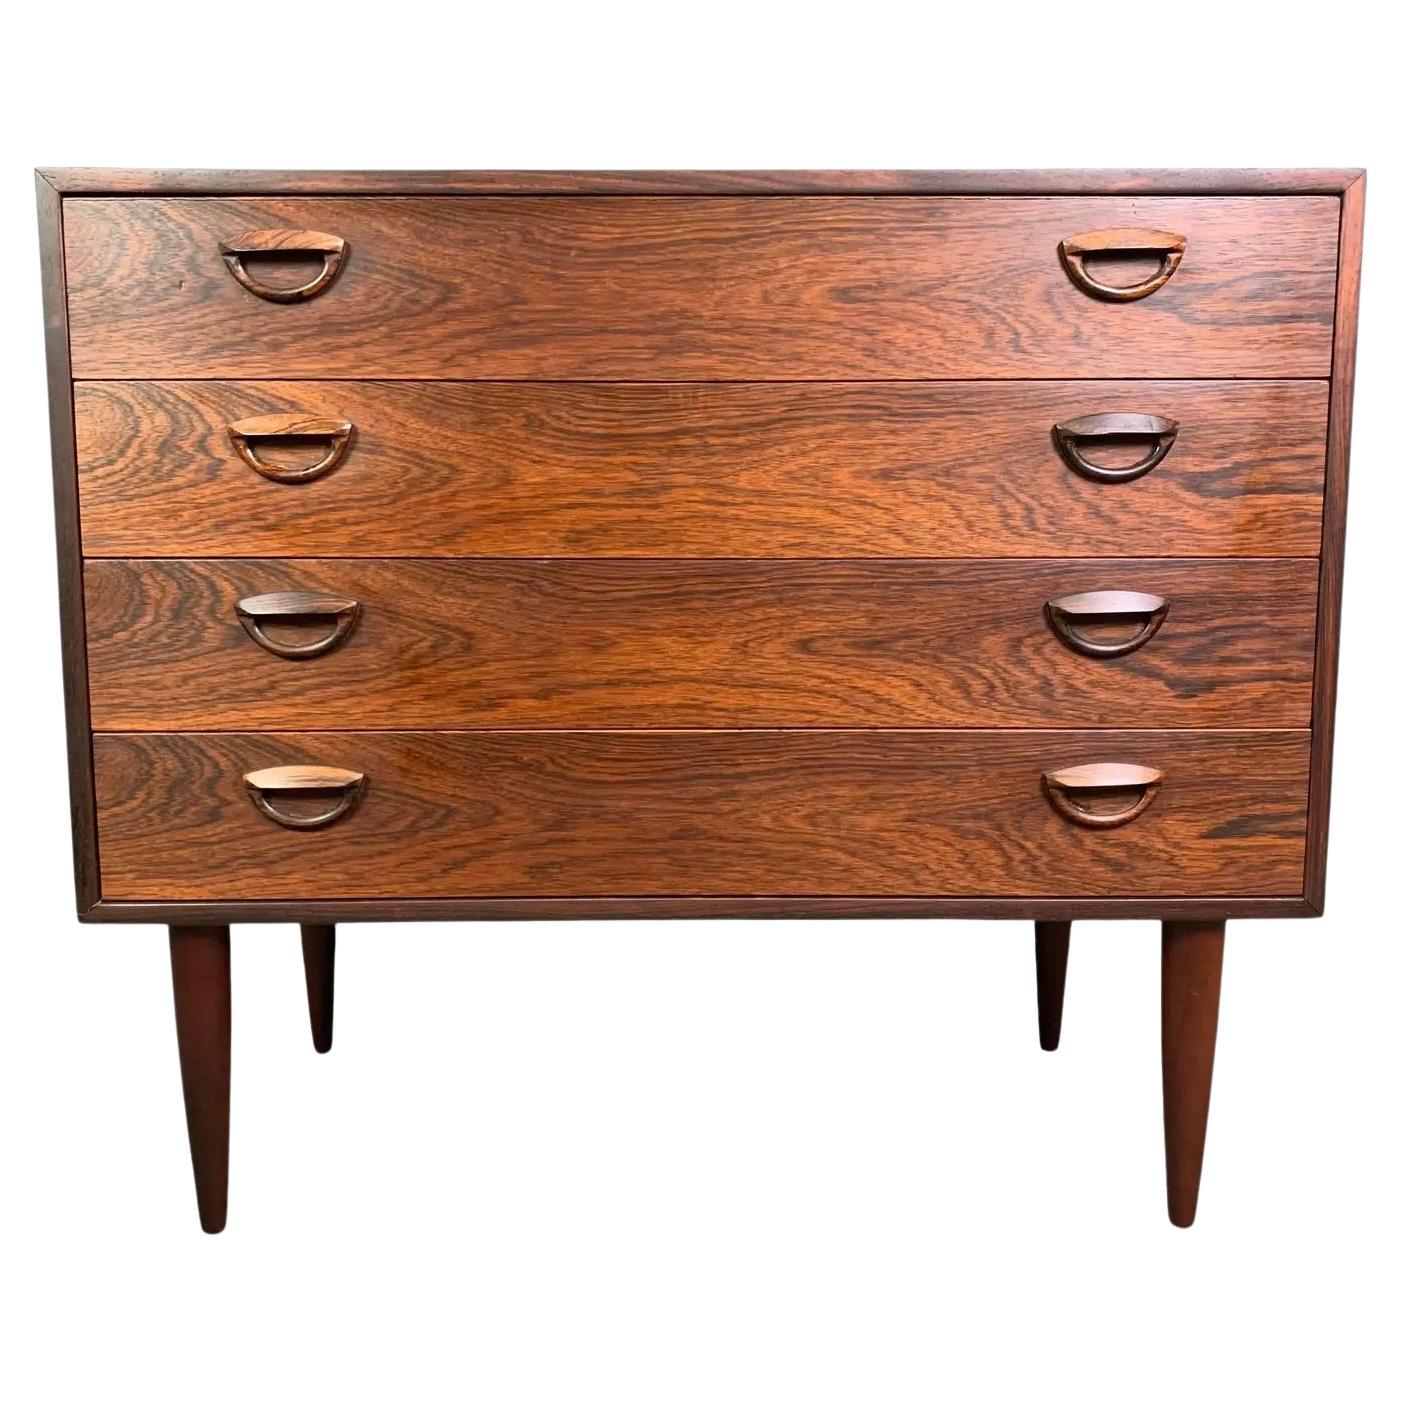 Vintage Danish Mid-Century Rosewood Chest of Drawers Dresser For Sale